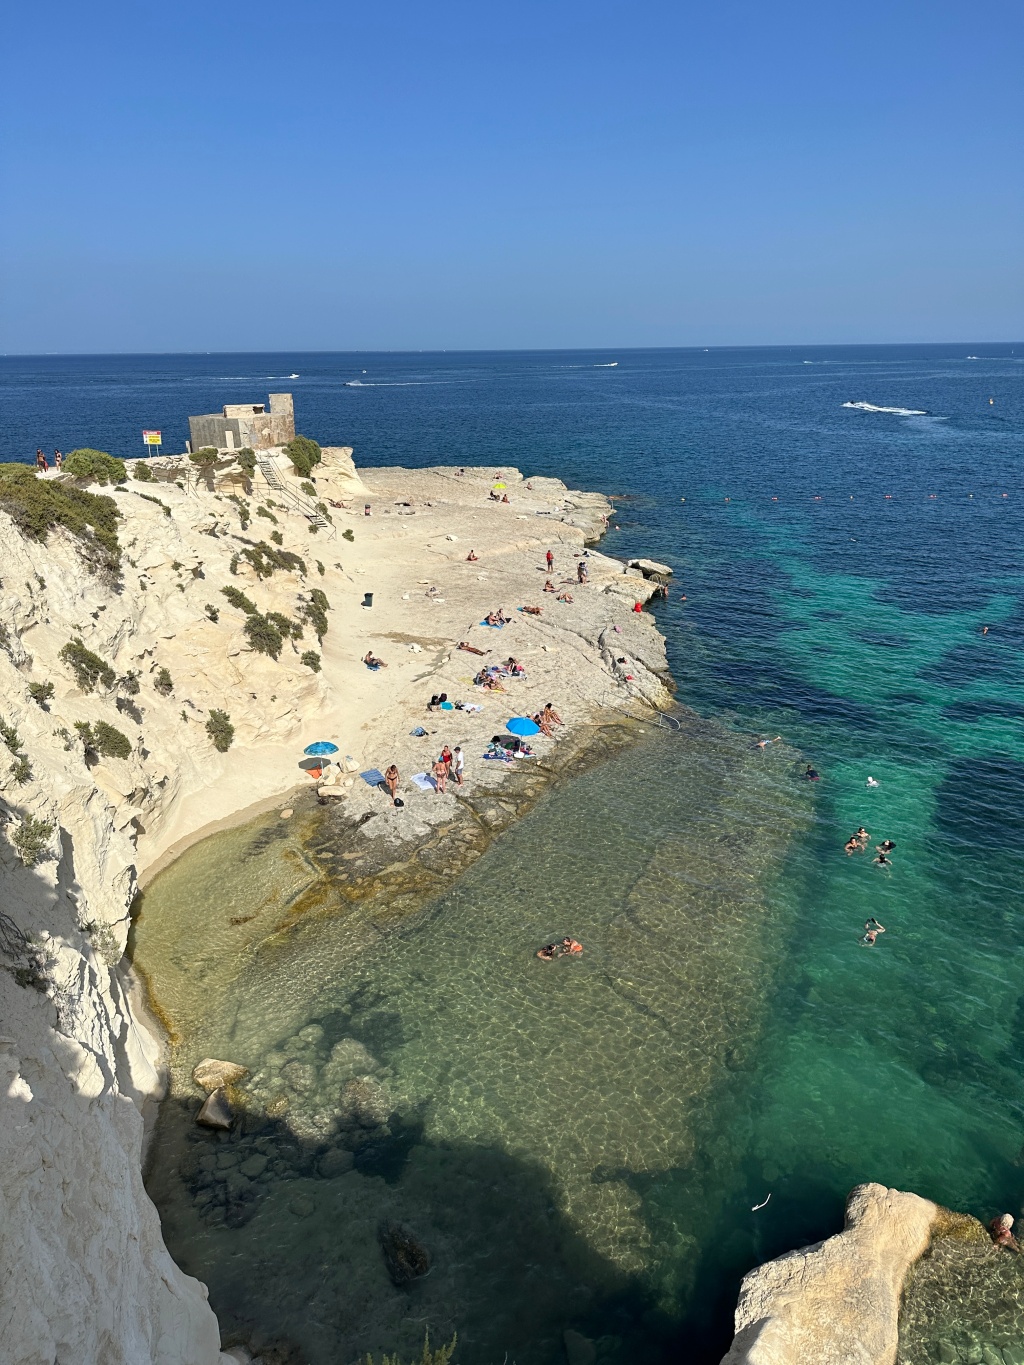 A Review of the Beaches in Malta